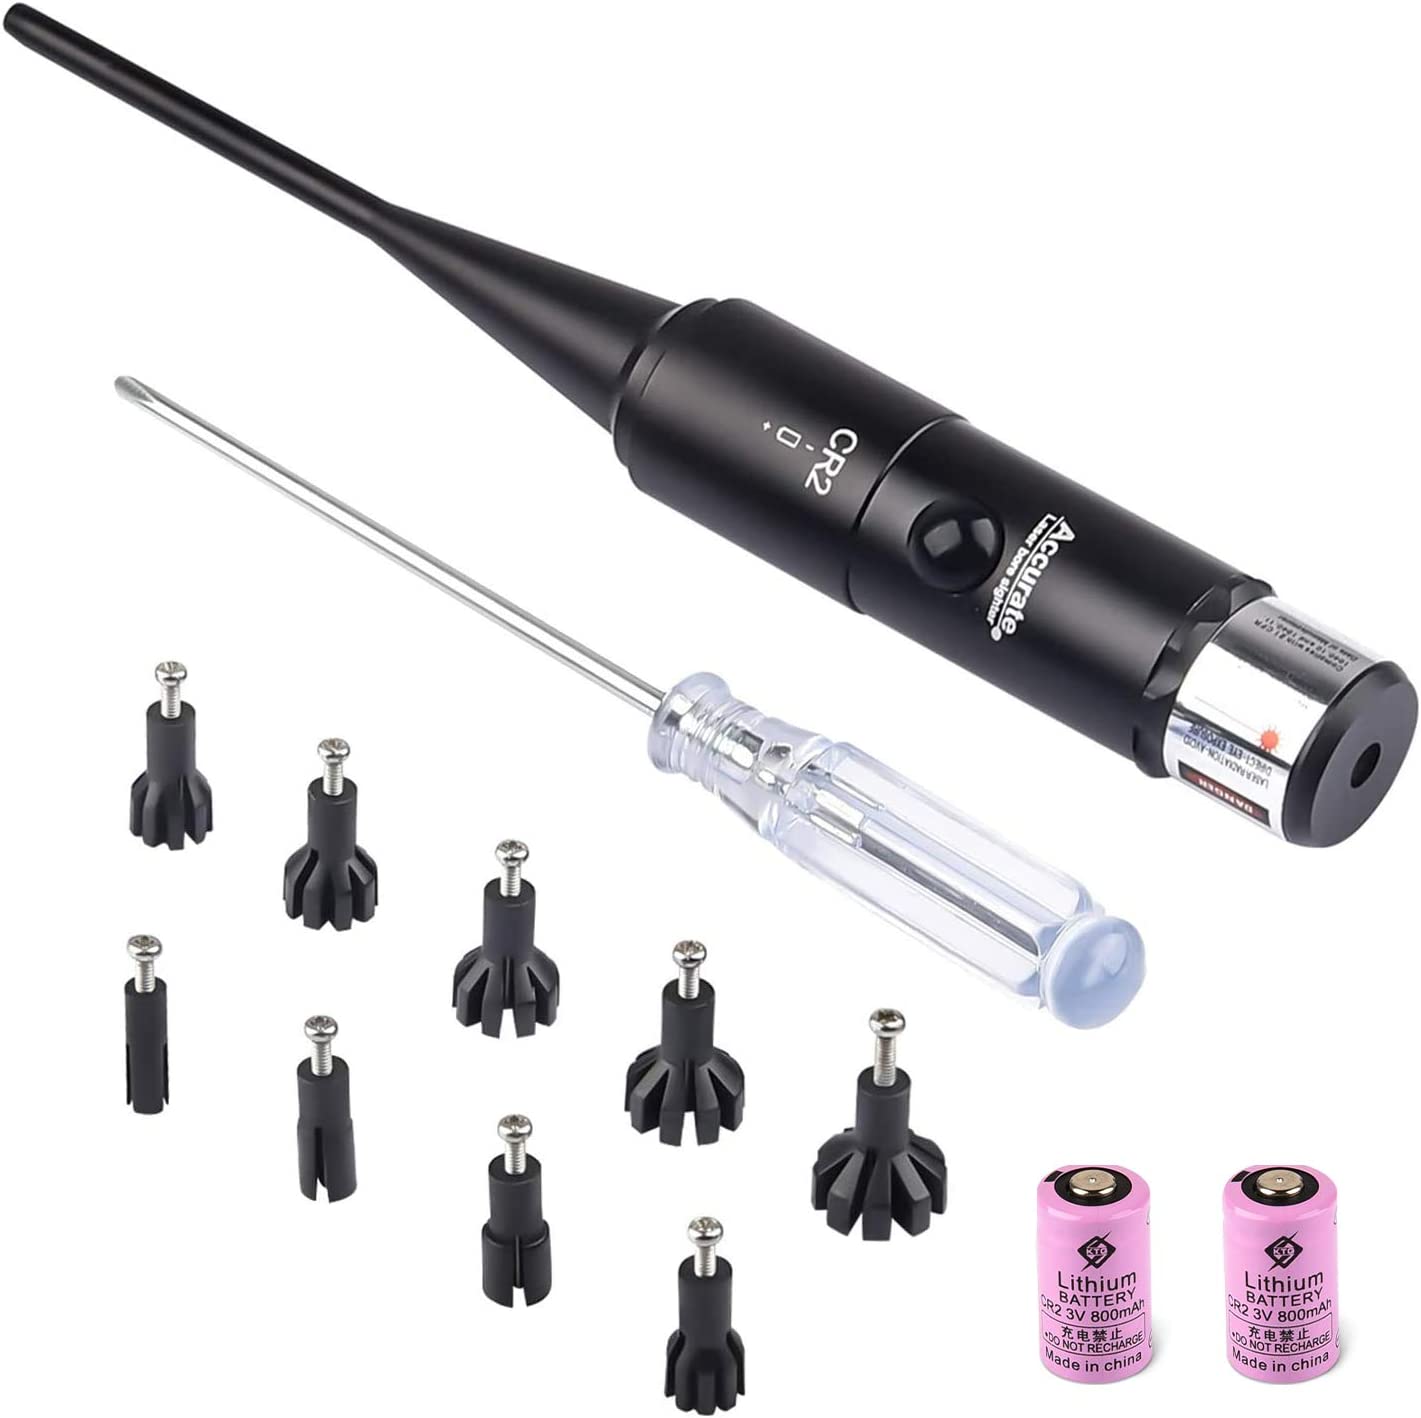 Laser Bore Sight Kit Multiple Caliber with Big Button Switch for 0.177 to 0.54 Caliber Rifles Handgun Red Dot Bore Sighter 